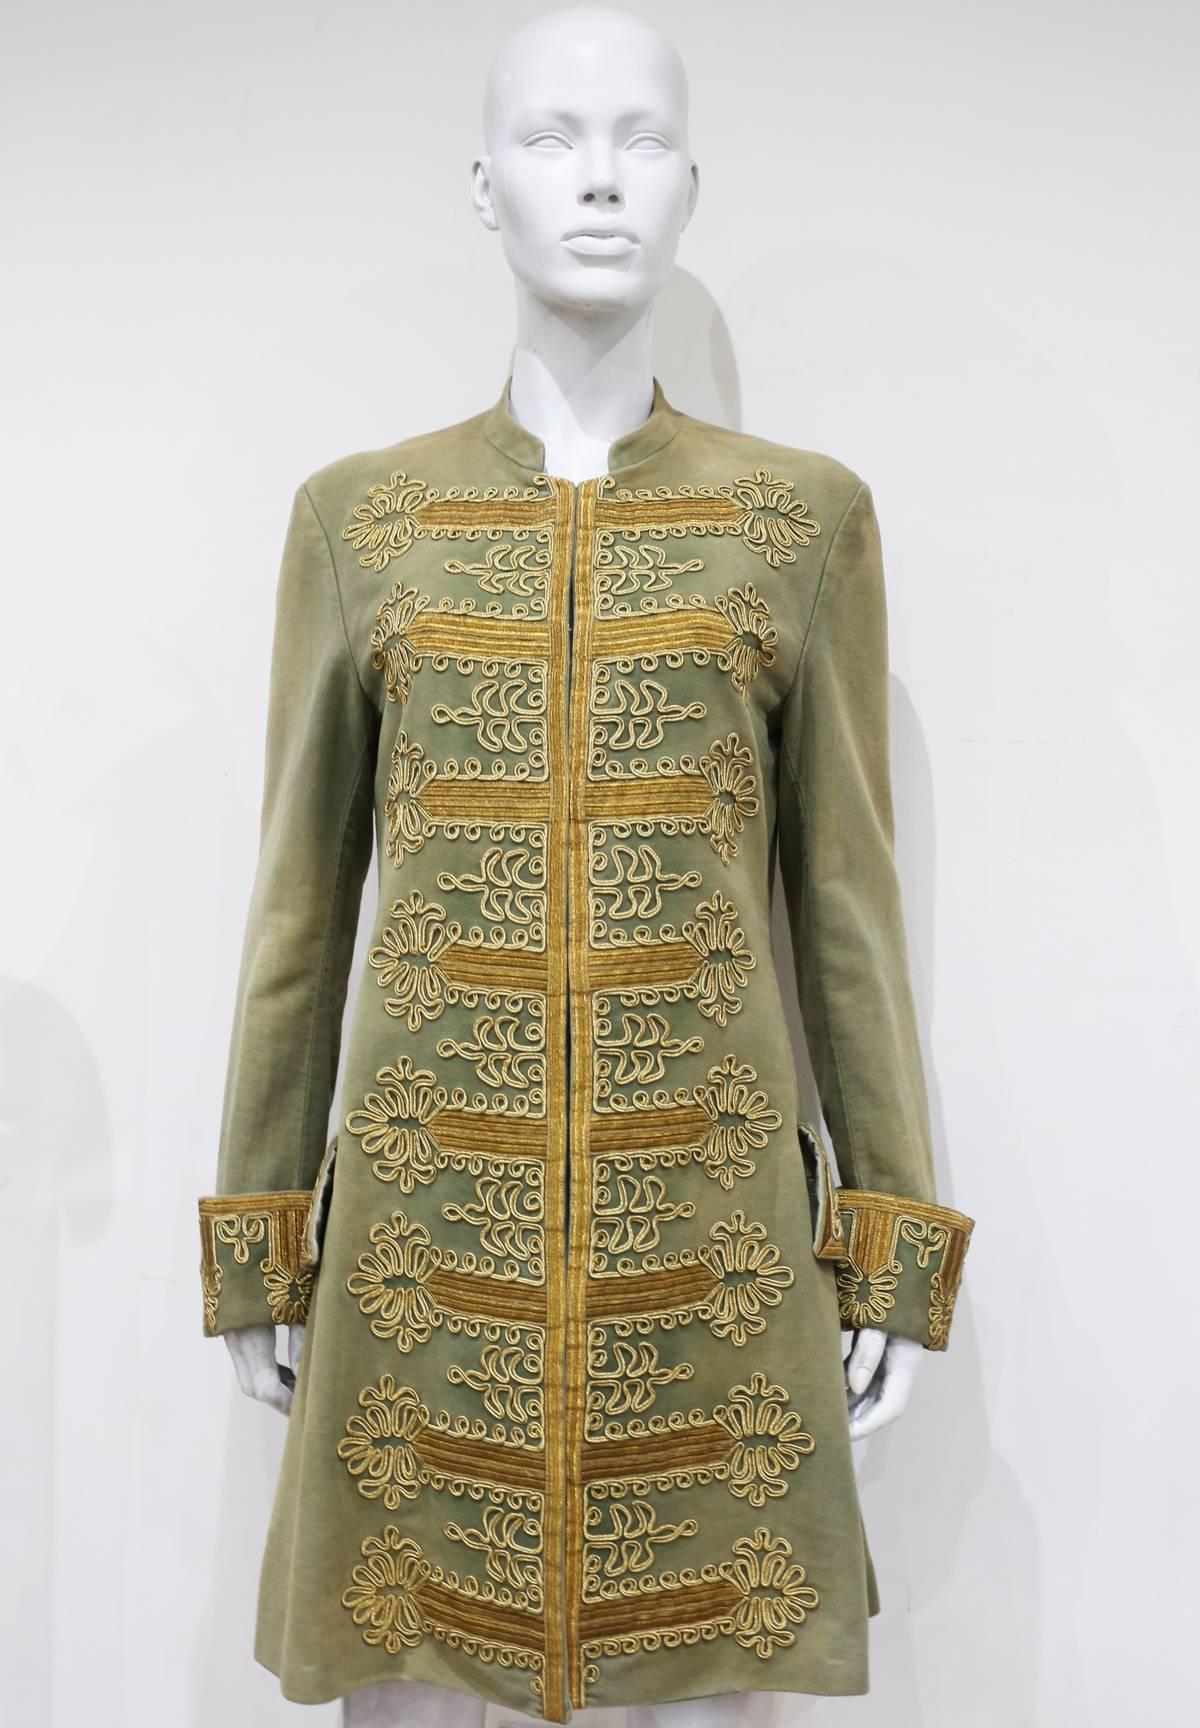 Ralph Lauren military inspired Napoleon jacket with lame embroidery, c. 2000s 2